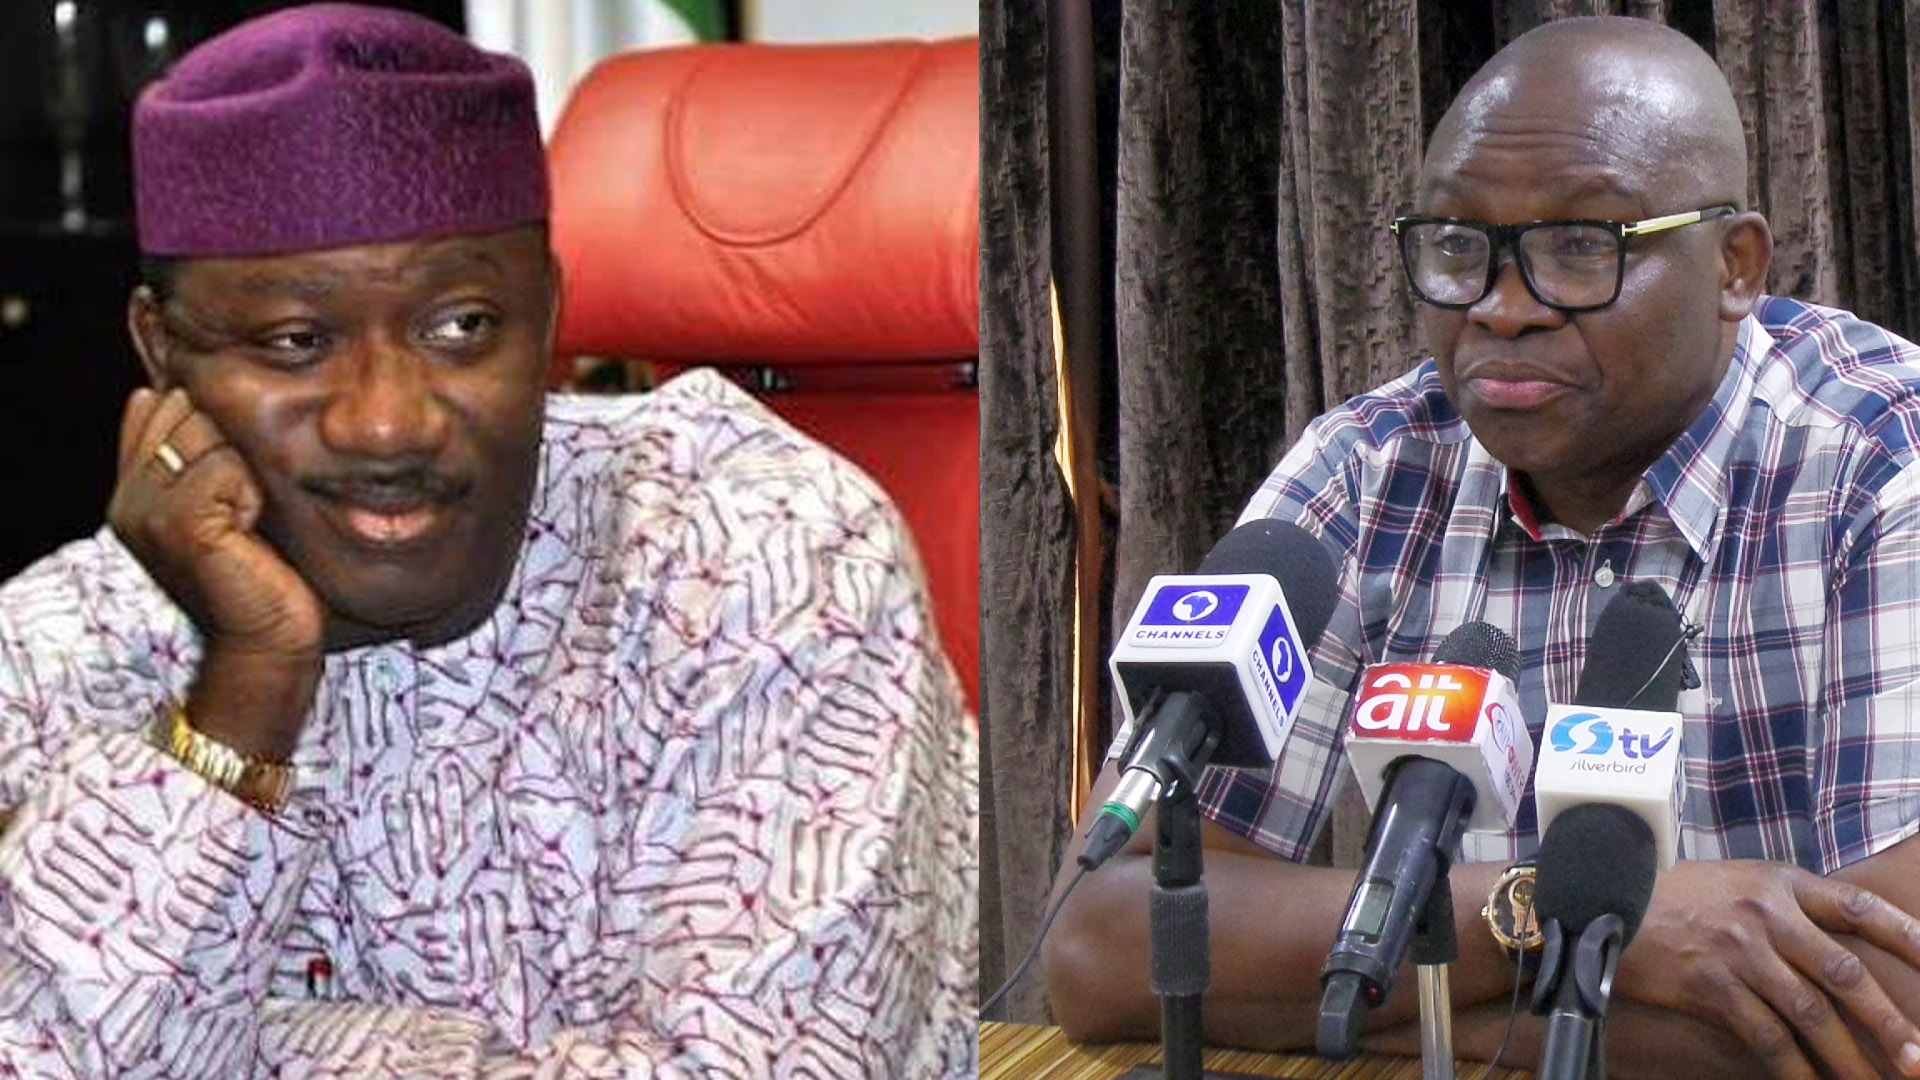 Fayose and Fayemi used to illustrate the story. [Photo credit: NewsTimes Nigeria]